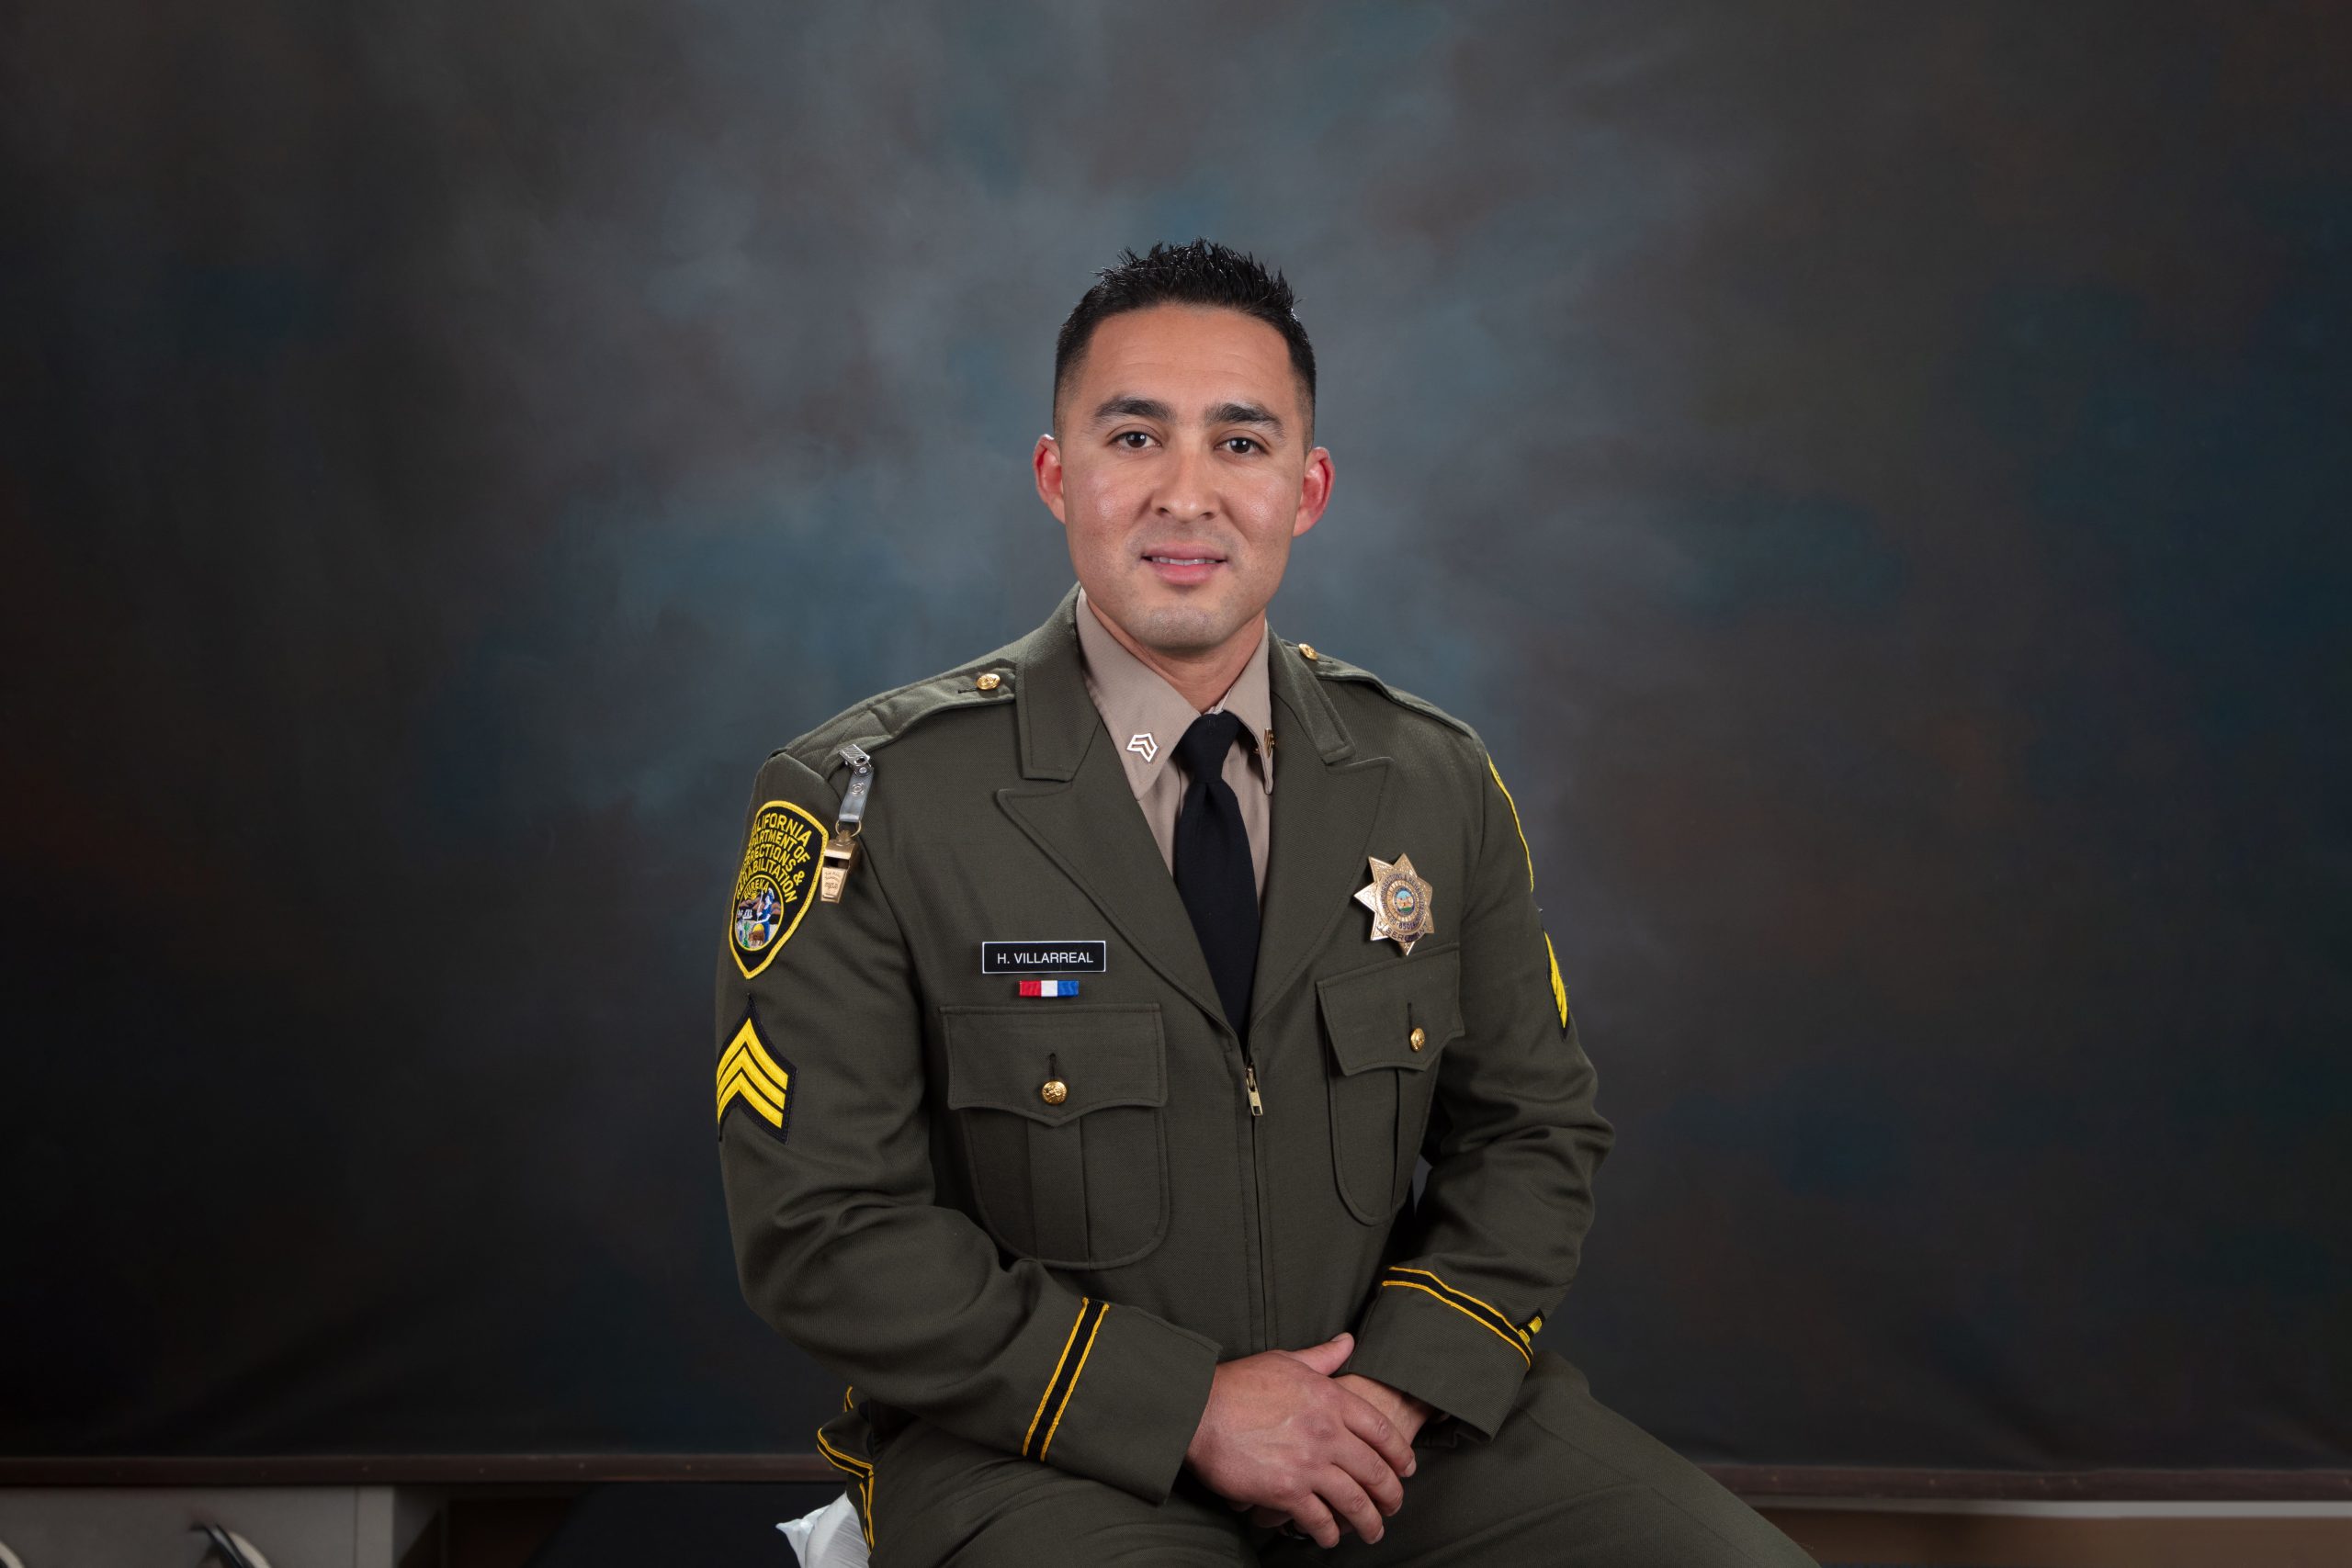 Sgt. Hector Villarreal was awarded a Gold Medal in the Governor's State Employee Medal of Valor ceremony.